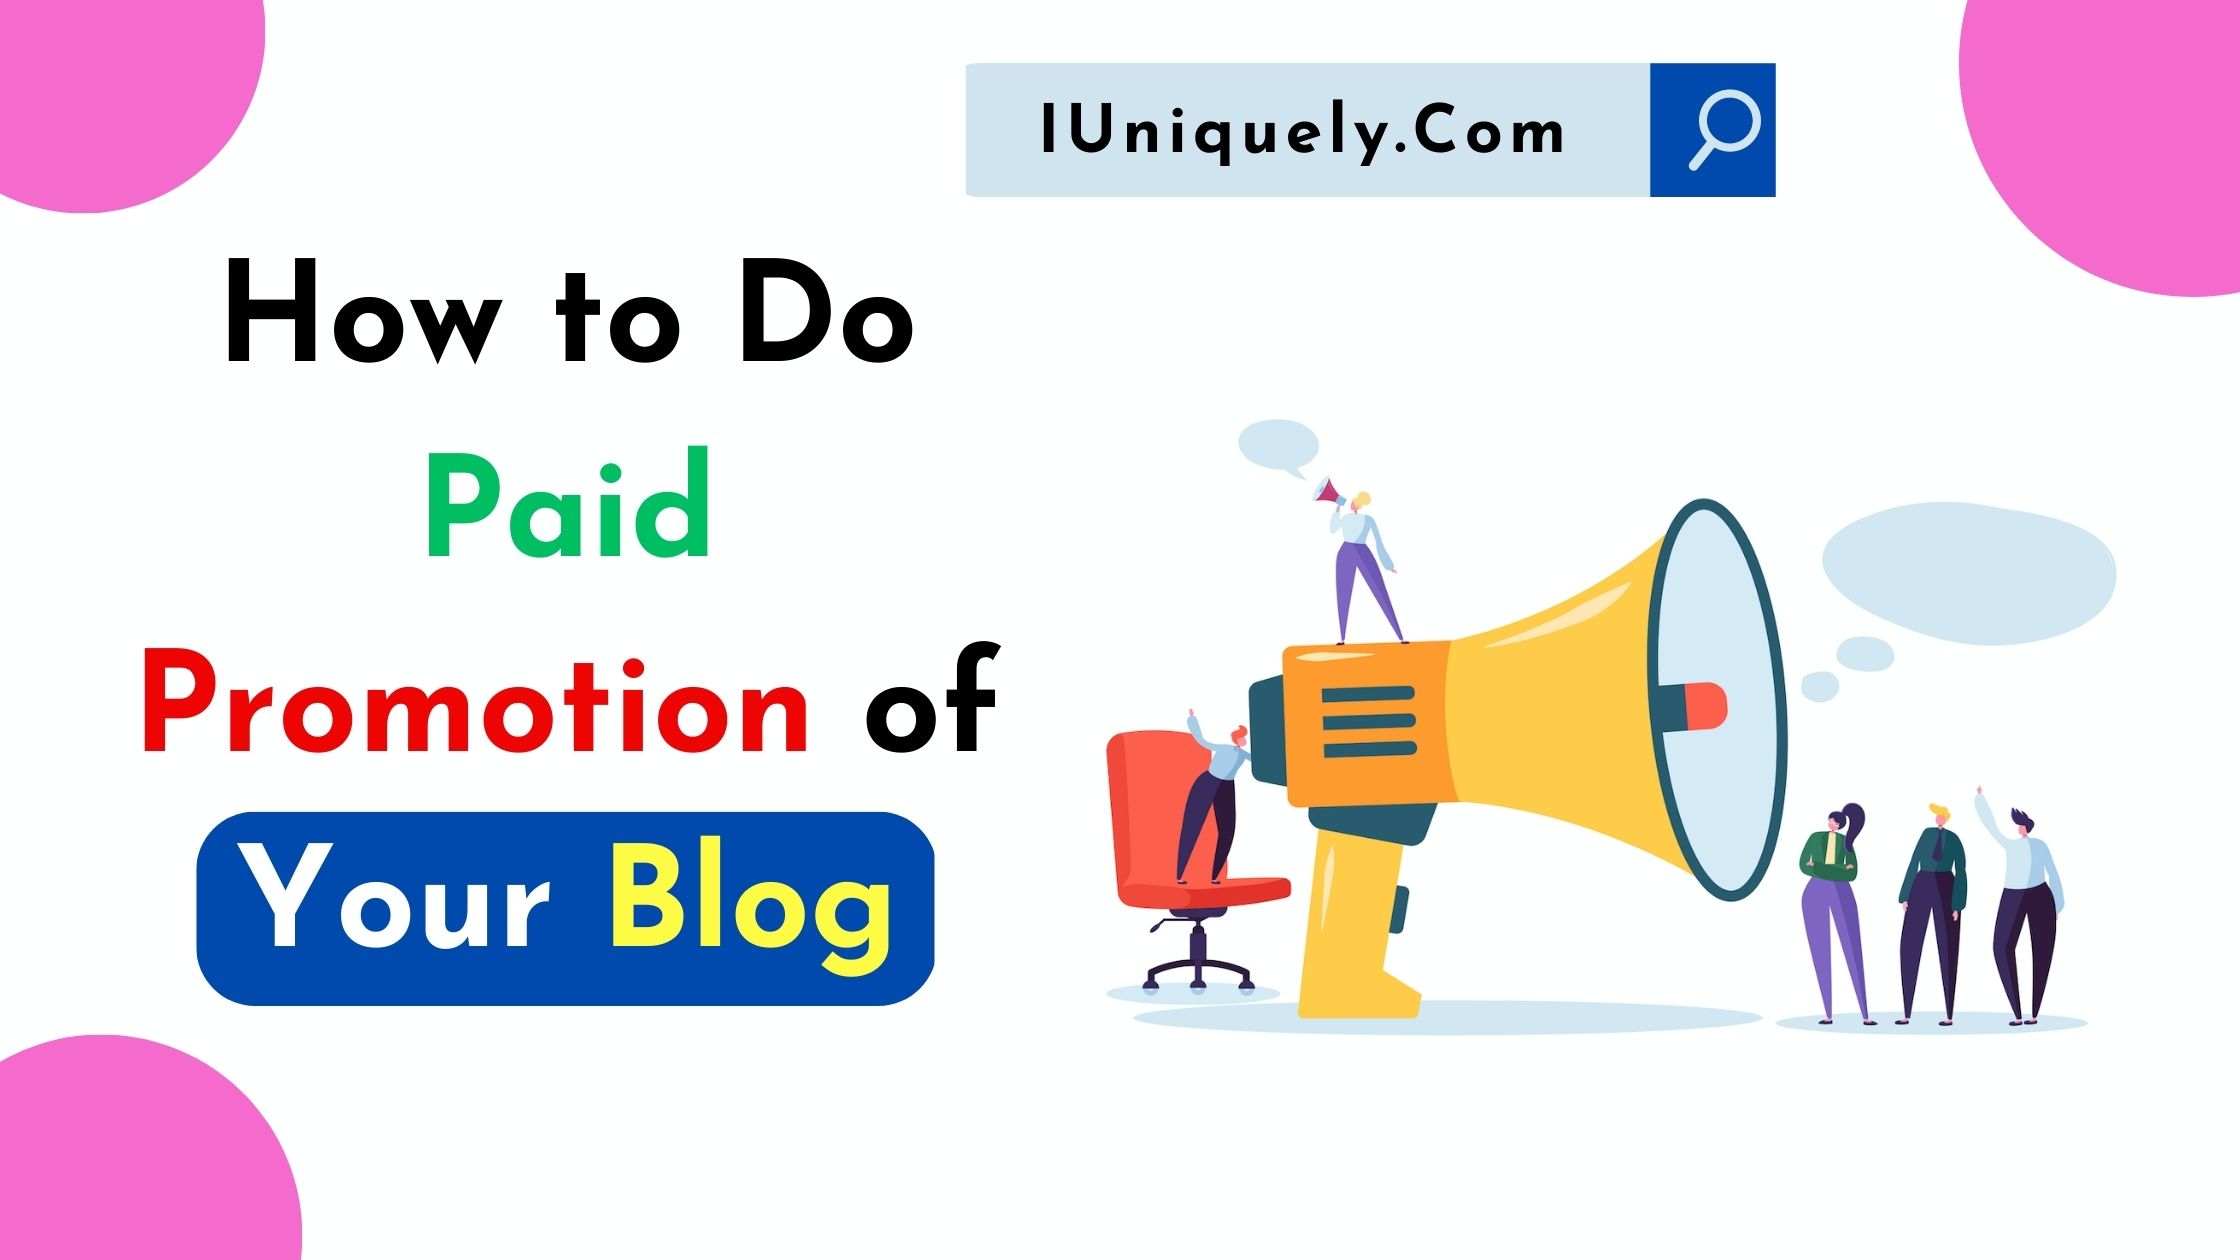 How to Do Paid Promotion of Your Blog